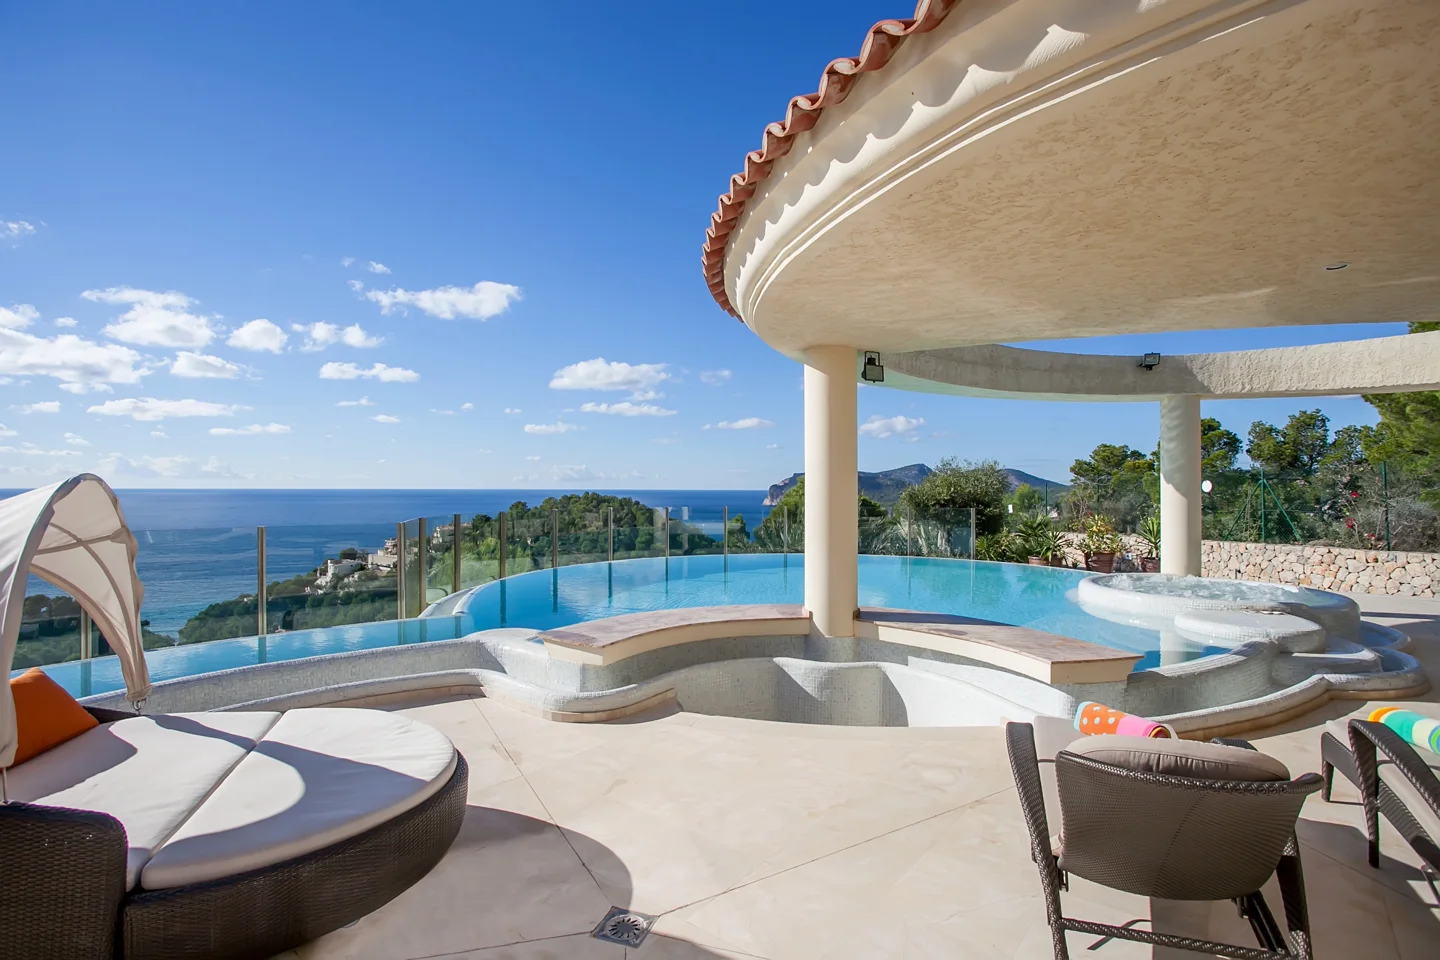 State of the art villa with stunning sea views